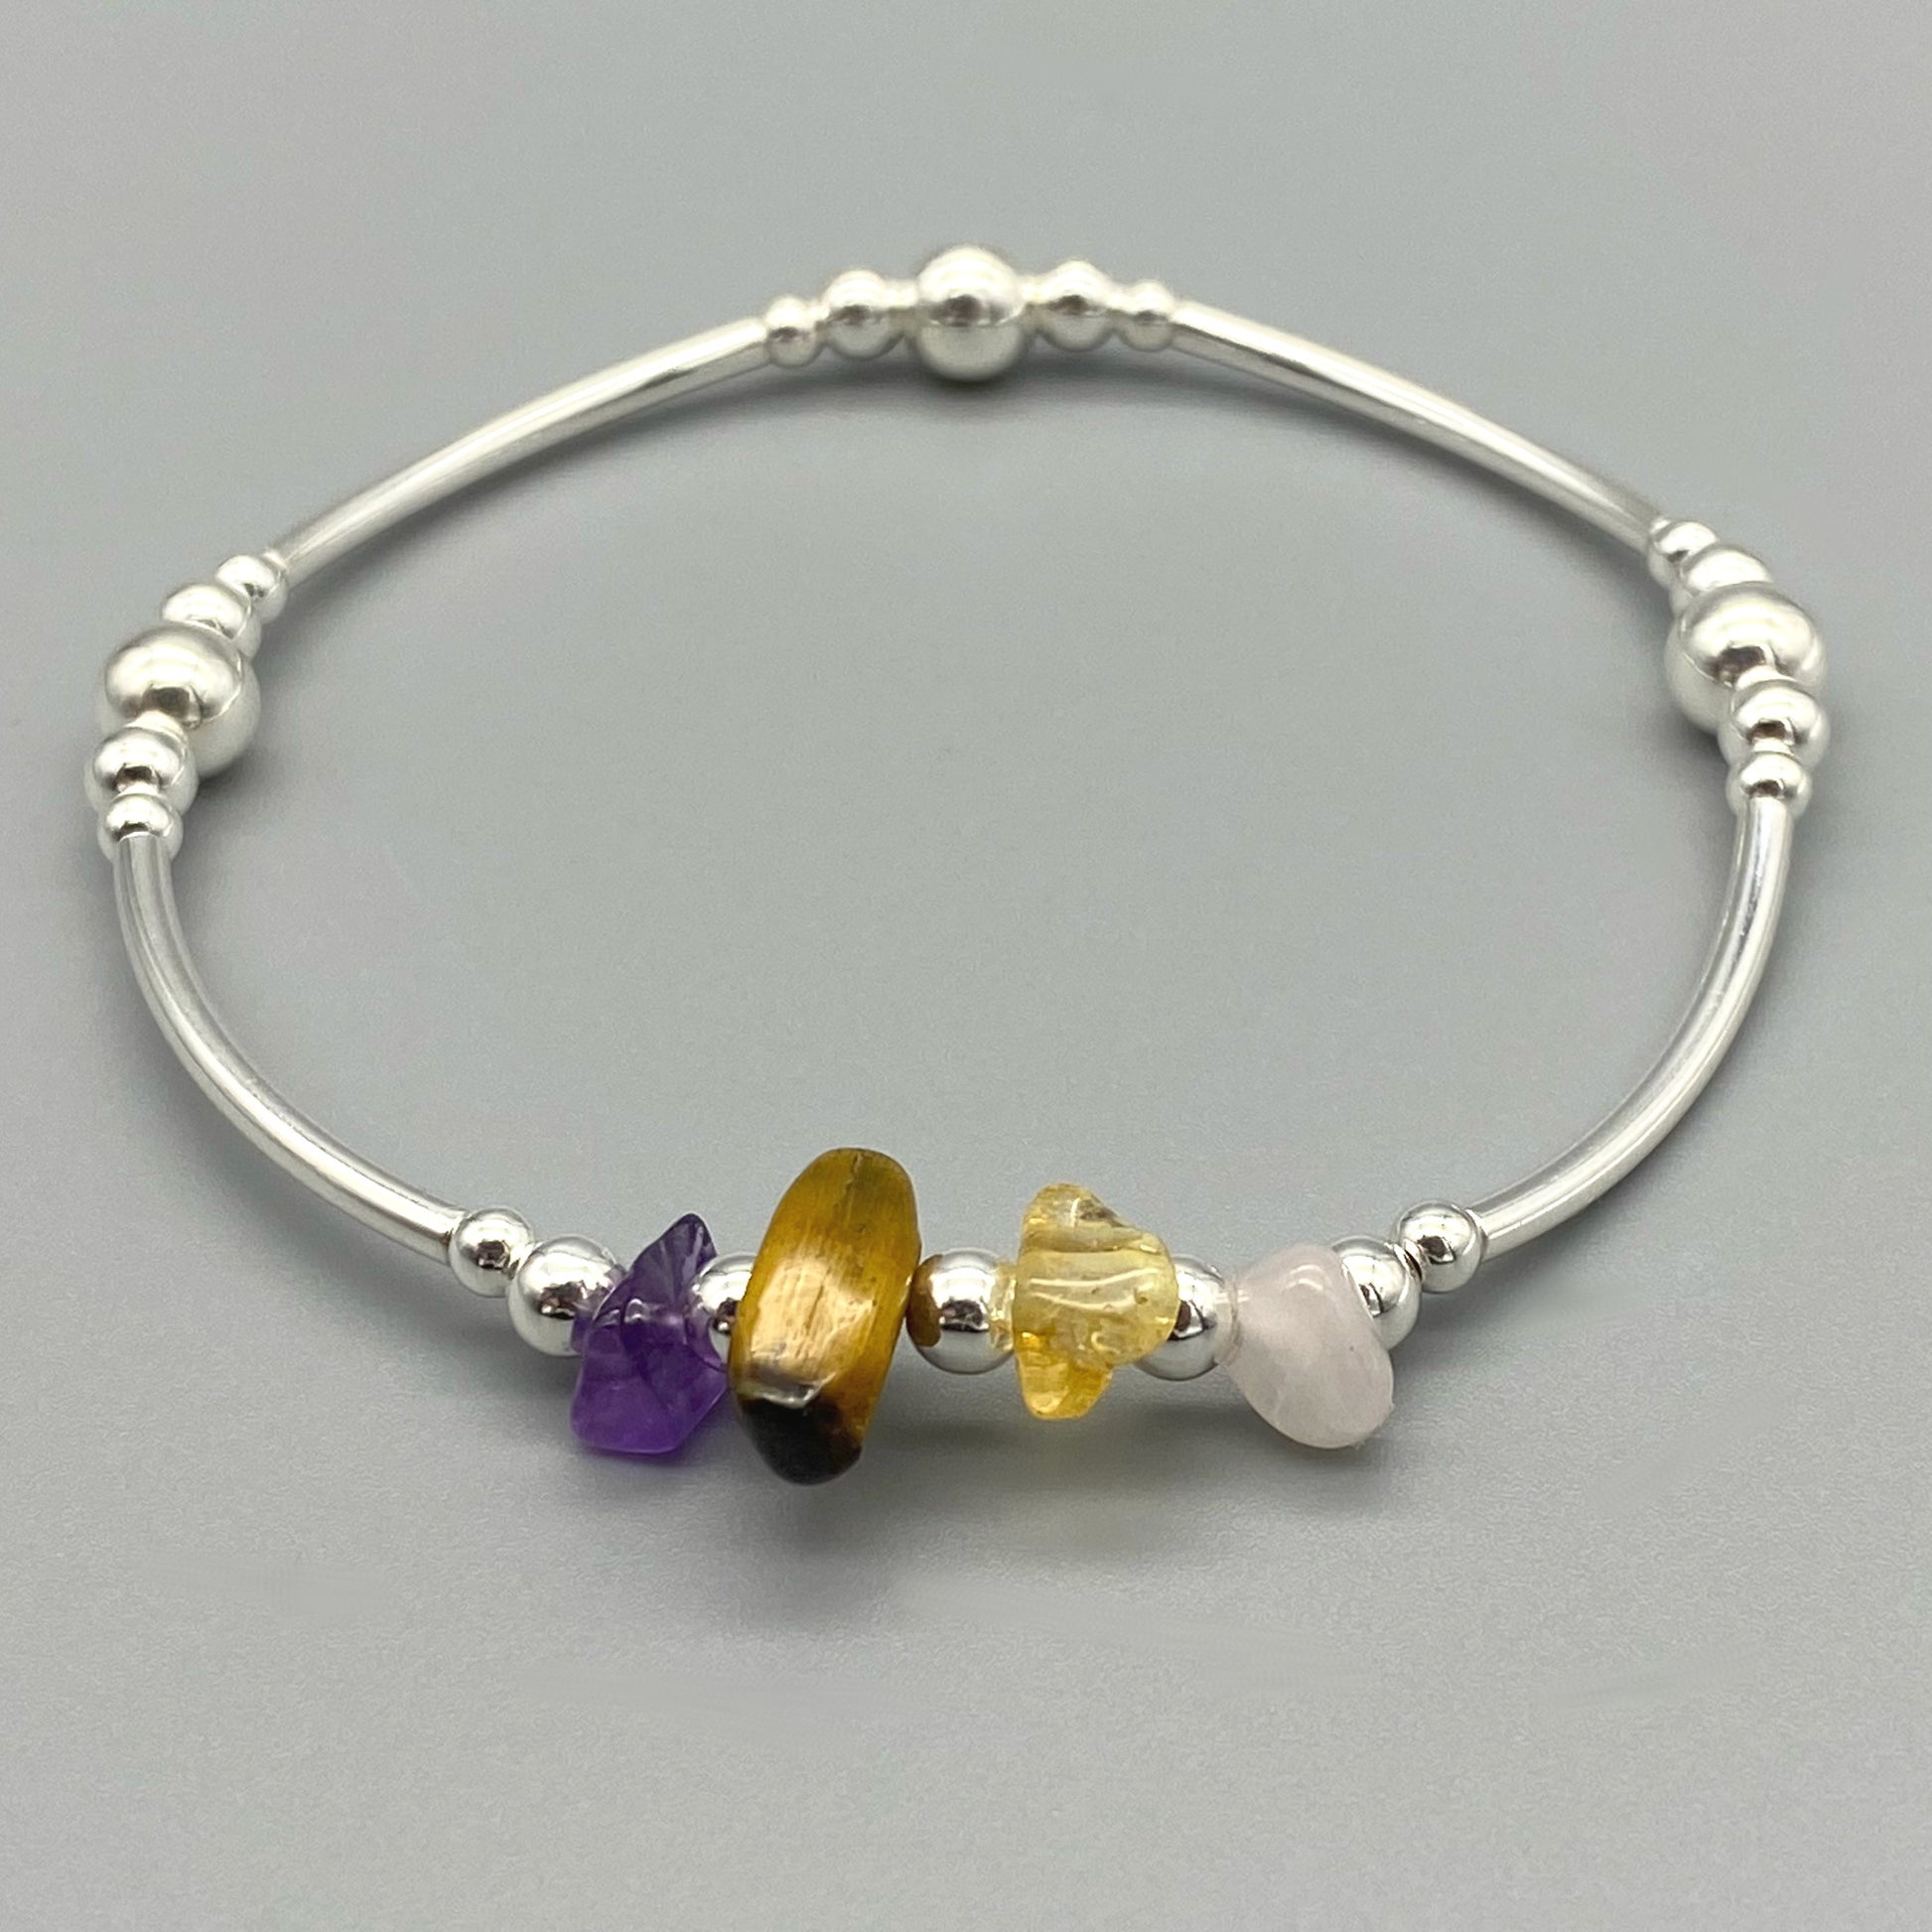 Menopause Support Healing Crystal Chips Sterling Silver Stacking Bracelet by My Silver Wish